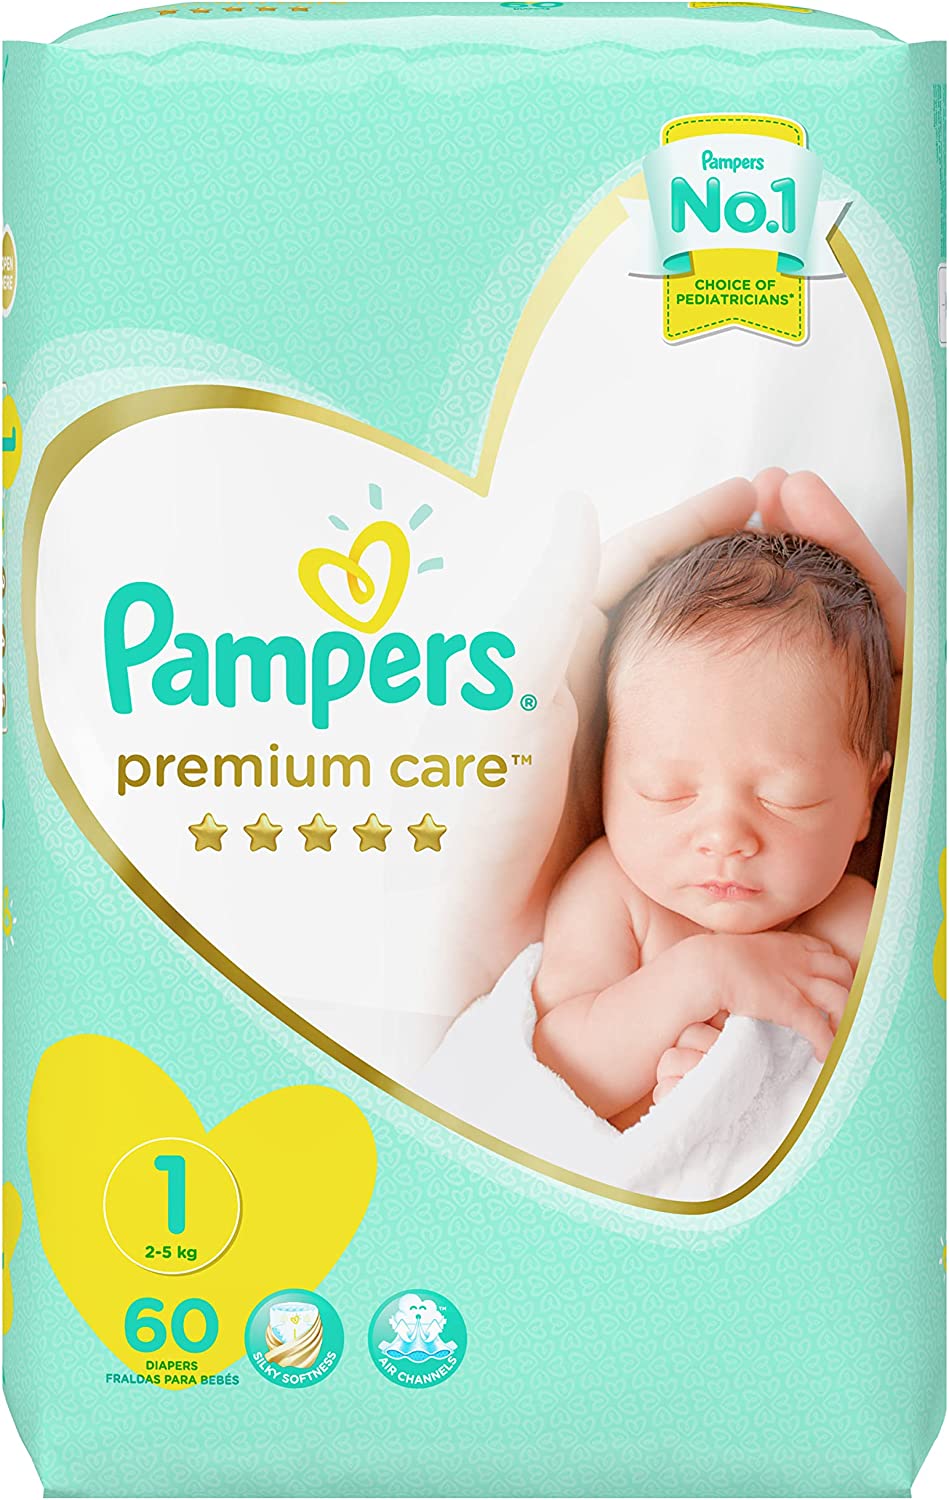 pampers box baby dry